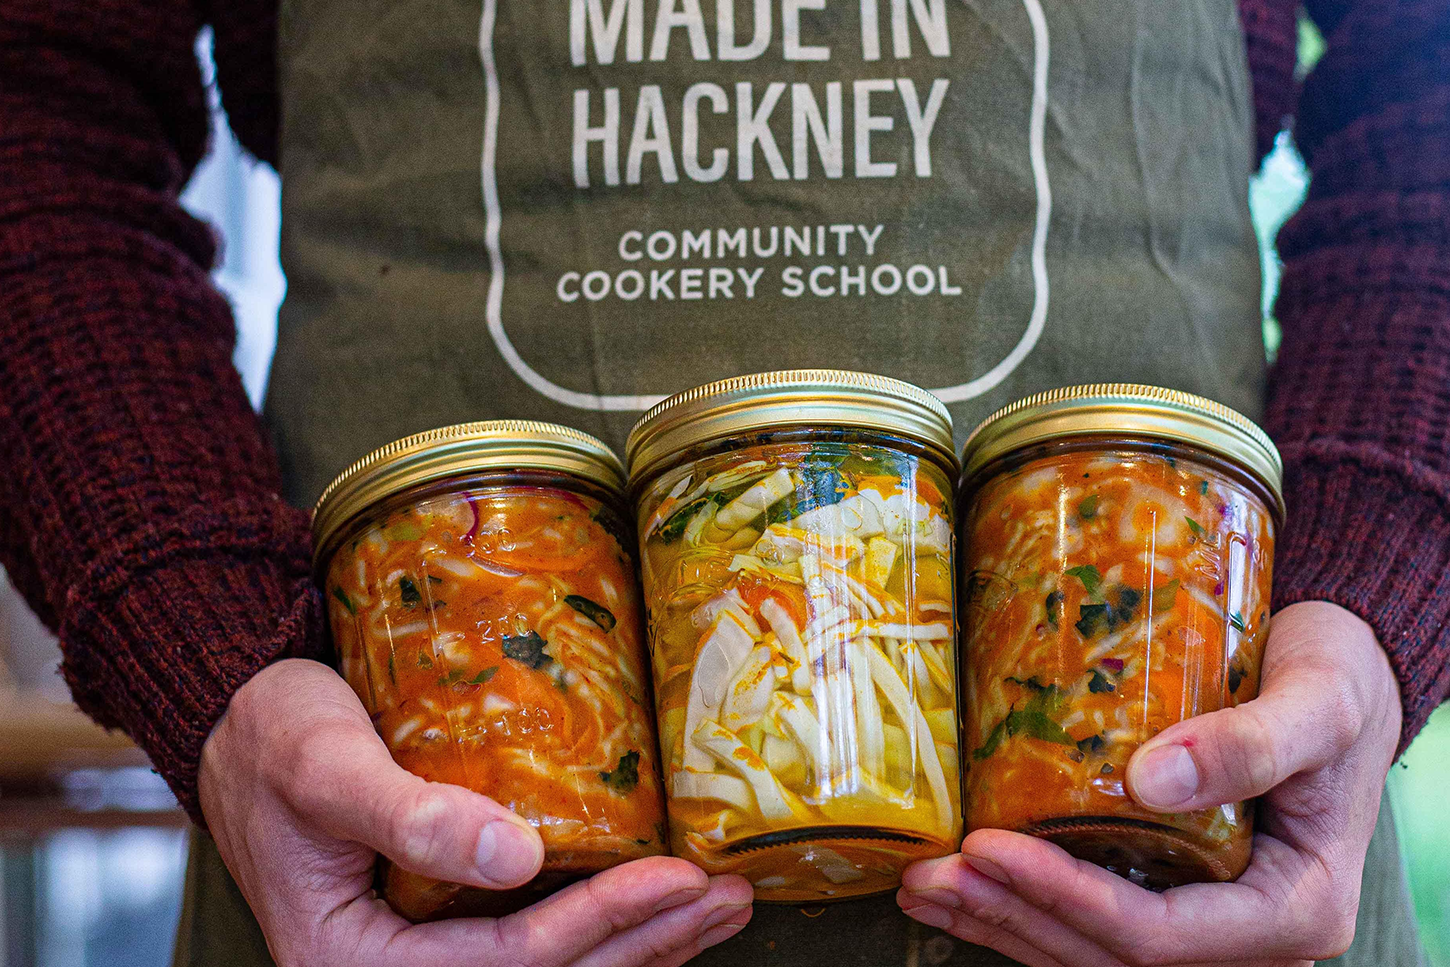 A man in a "Made in Hackney" apron holds three mason jars of vegan soup.